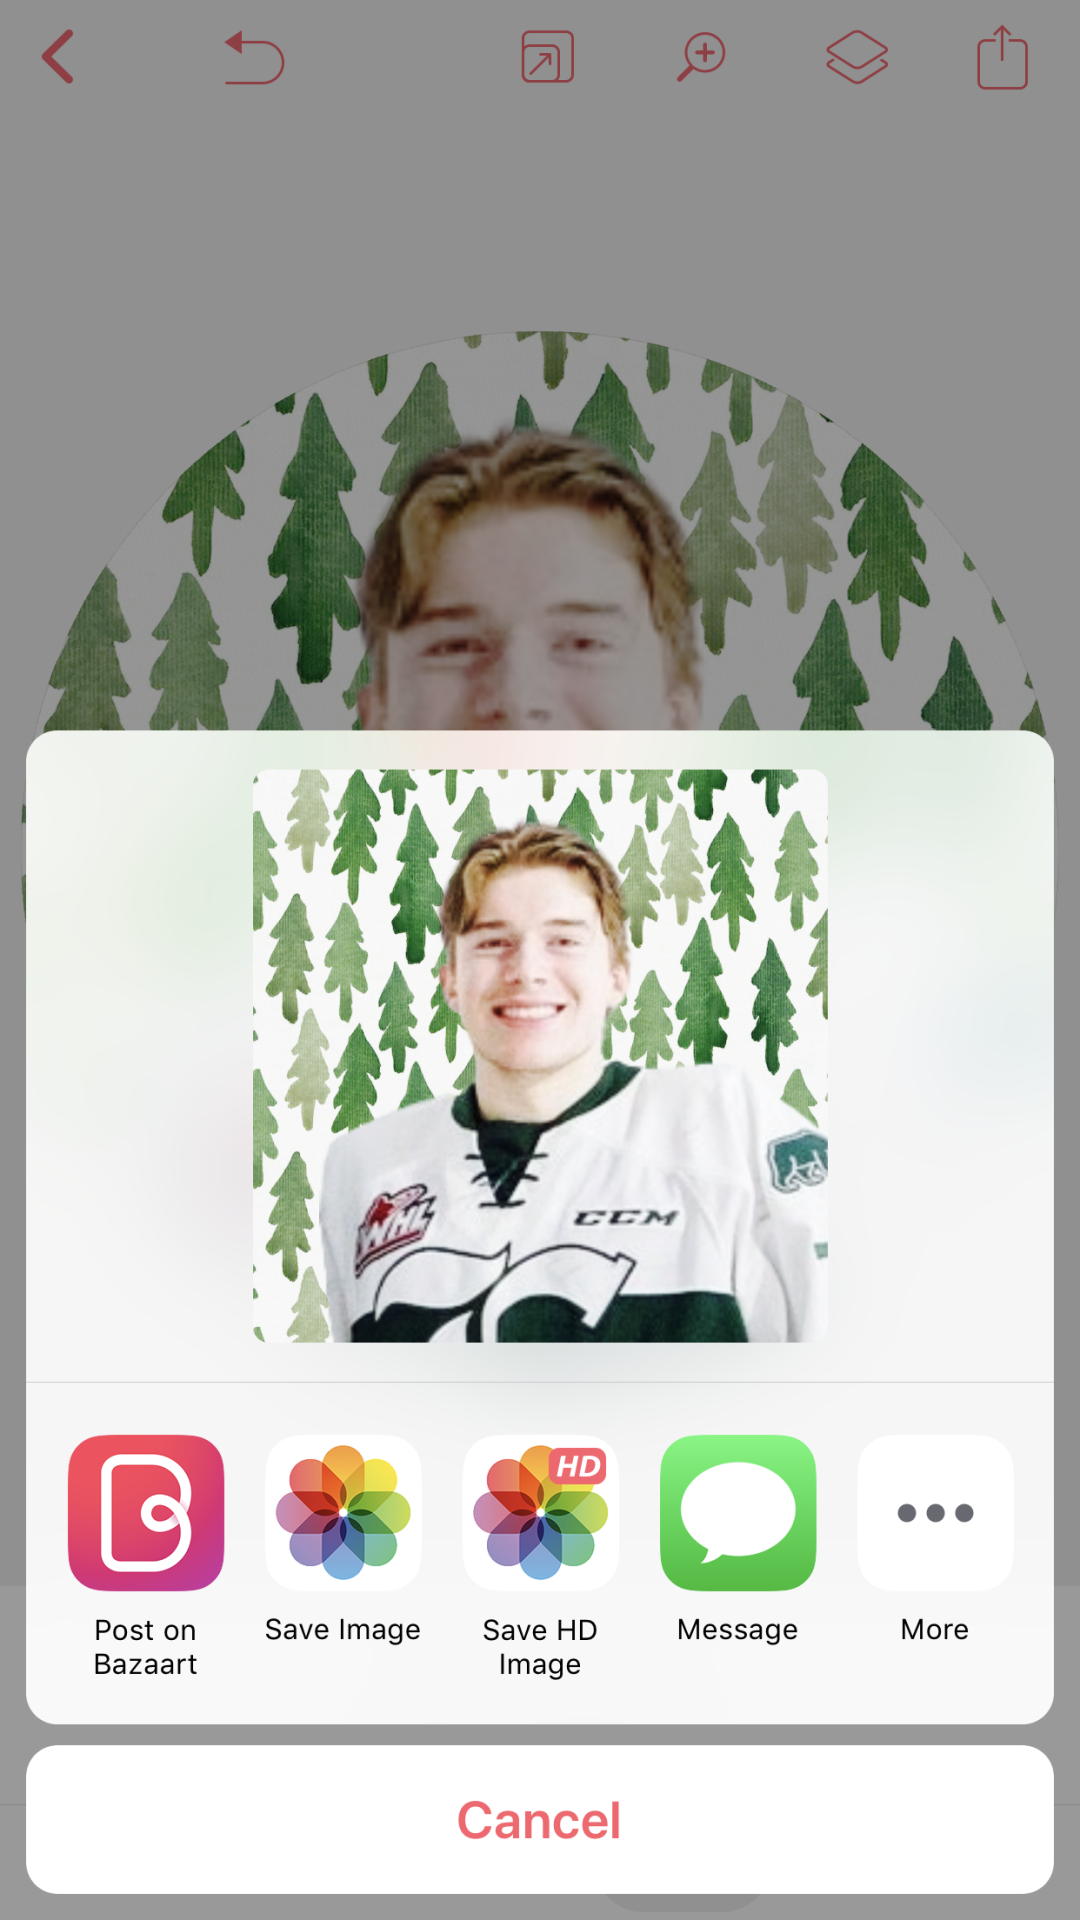 hopping on this trend #fyp #someslayingedits #foryou #blowthisup #edit, carter  hart